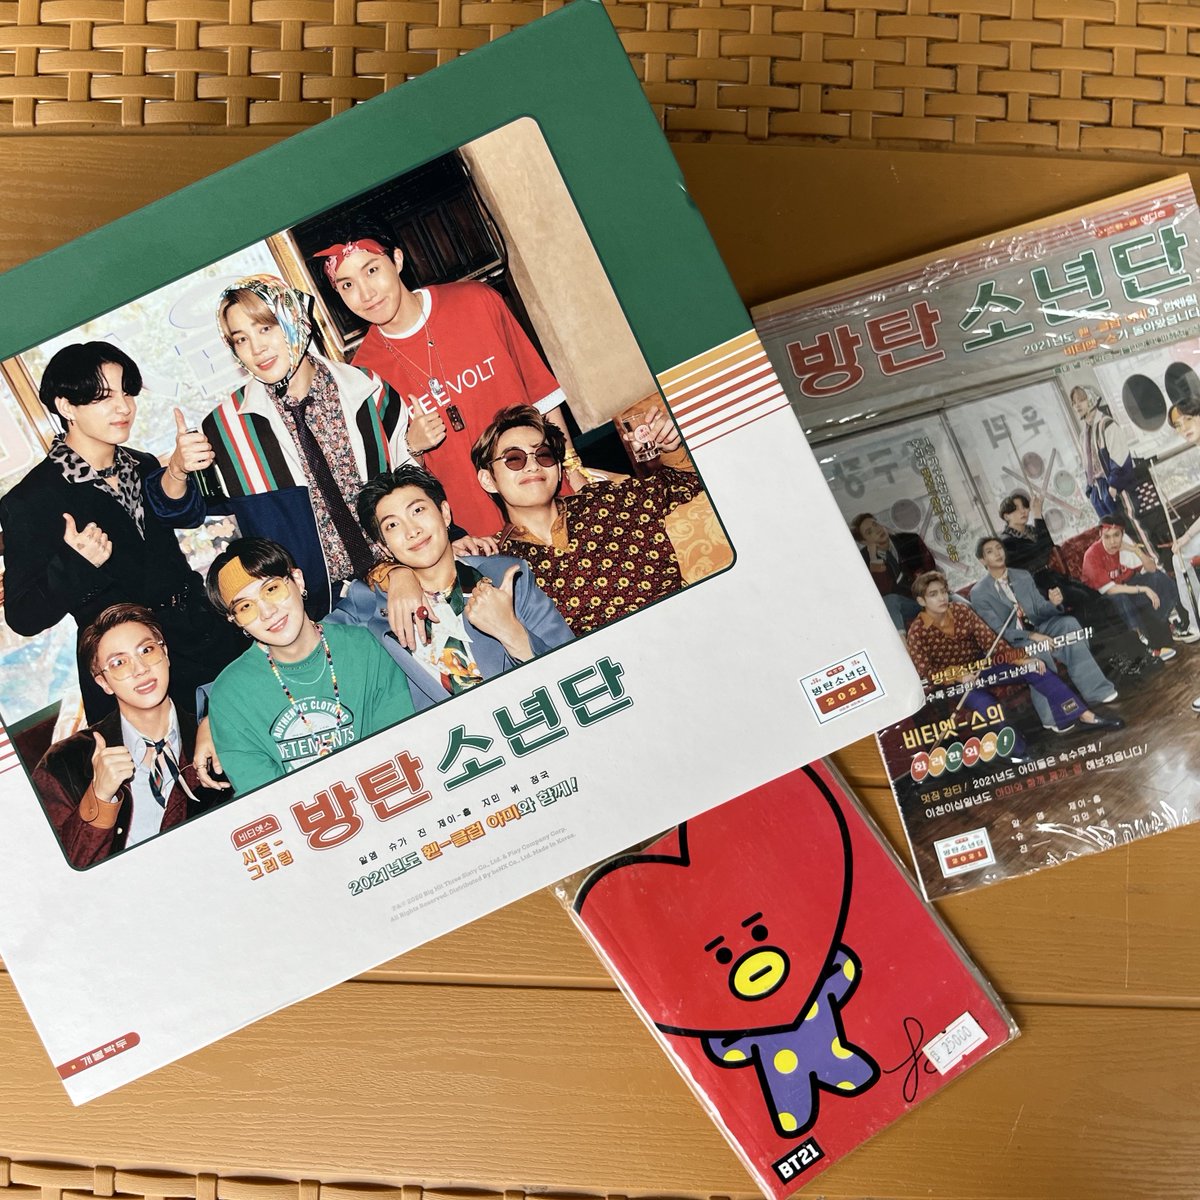 [help rt] wts in rush

BTS BE Deluxe Version included all
🎁Free Gift
💰IDR 600k / $45

not incl fee packing & platform

🍊 co by shopee ✅
🌎 ww shiping ✅

🏷️ bts 방탄소년단 태형 정국 남준 지민 제이홉 진 슈가 in the soop season greetings want to sell lfb looking for buyer army